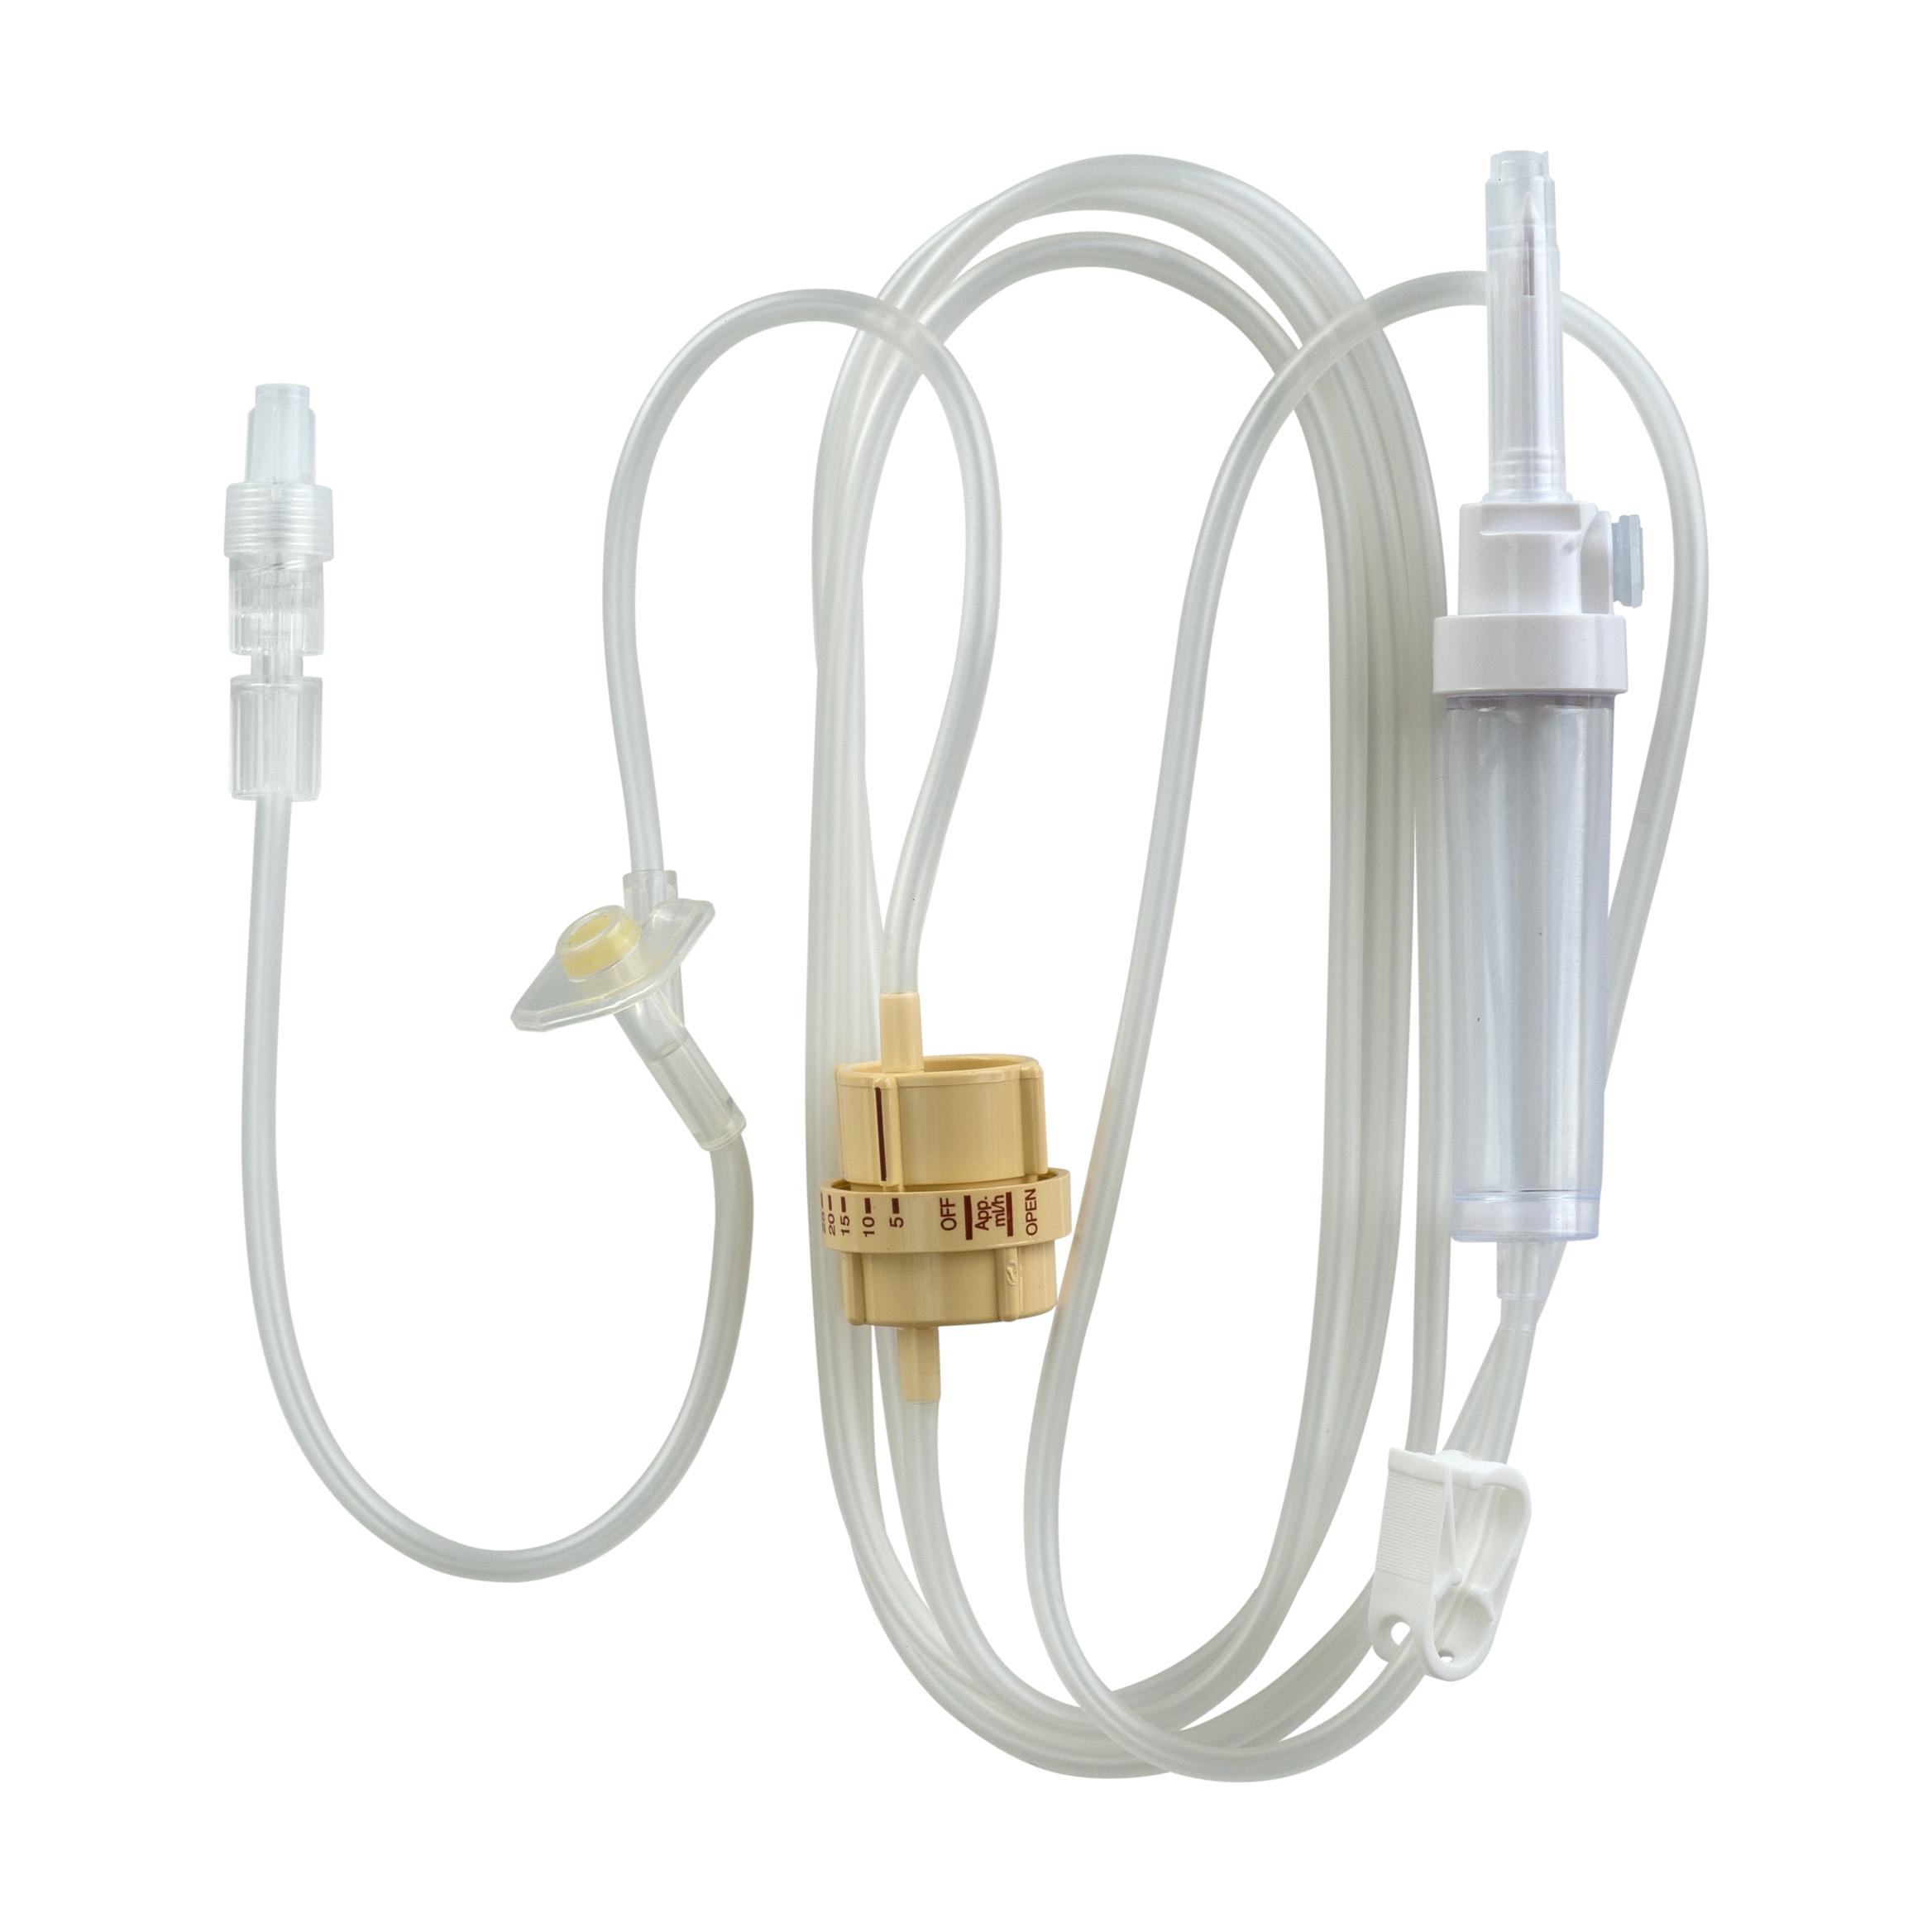 DOSI-FLOW® Flow Controller with infuser and Y-site